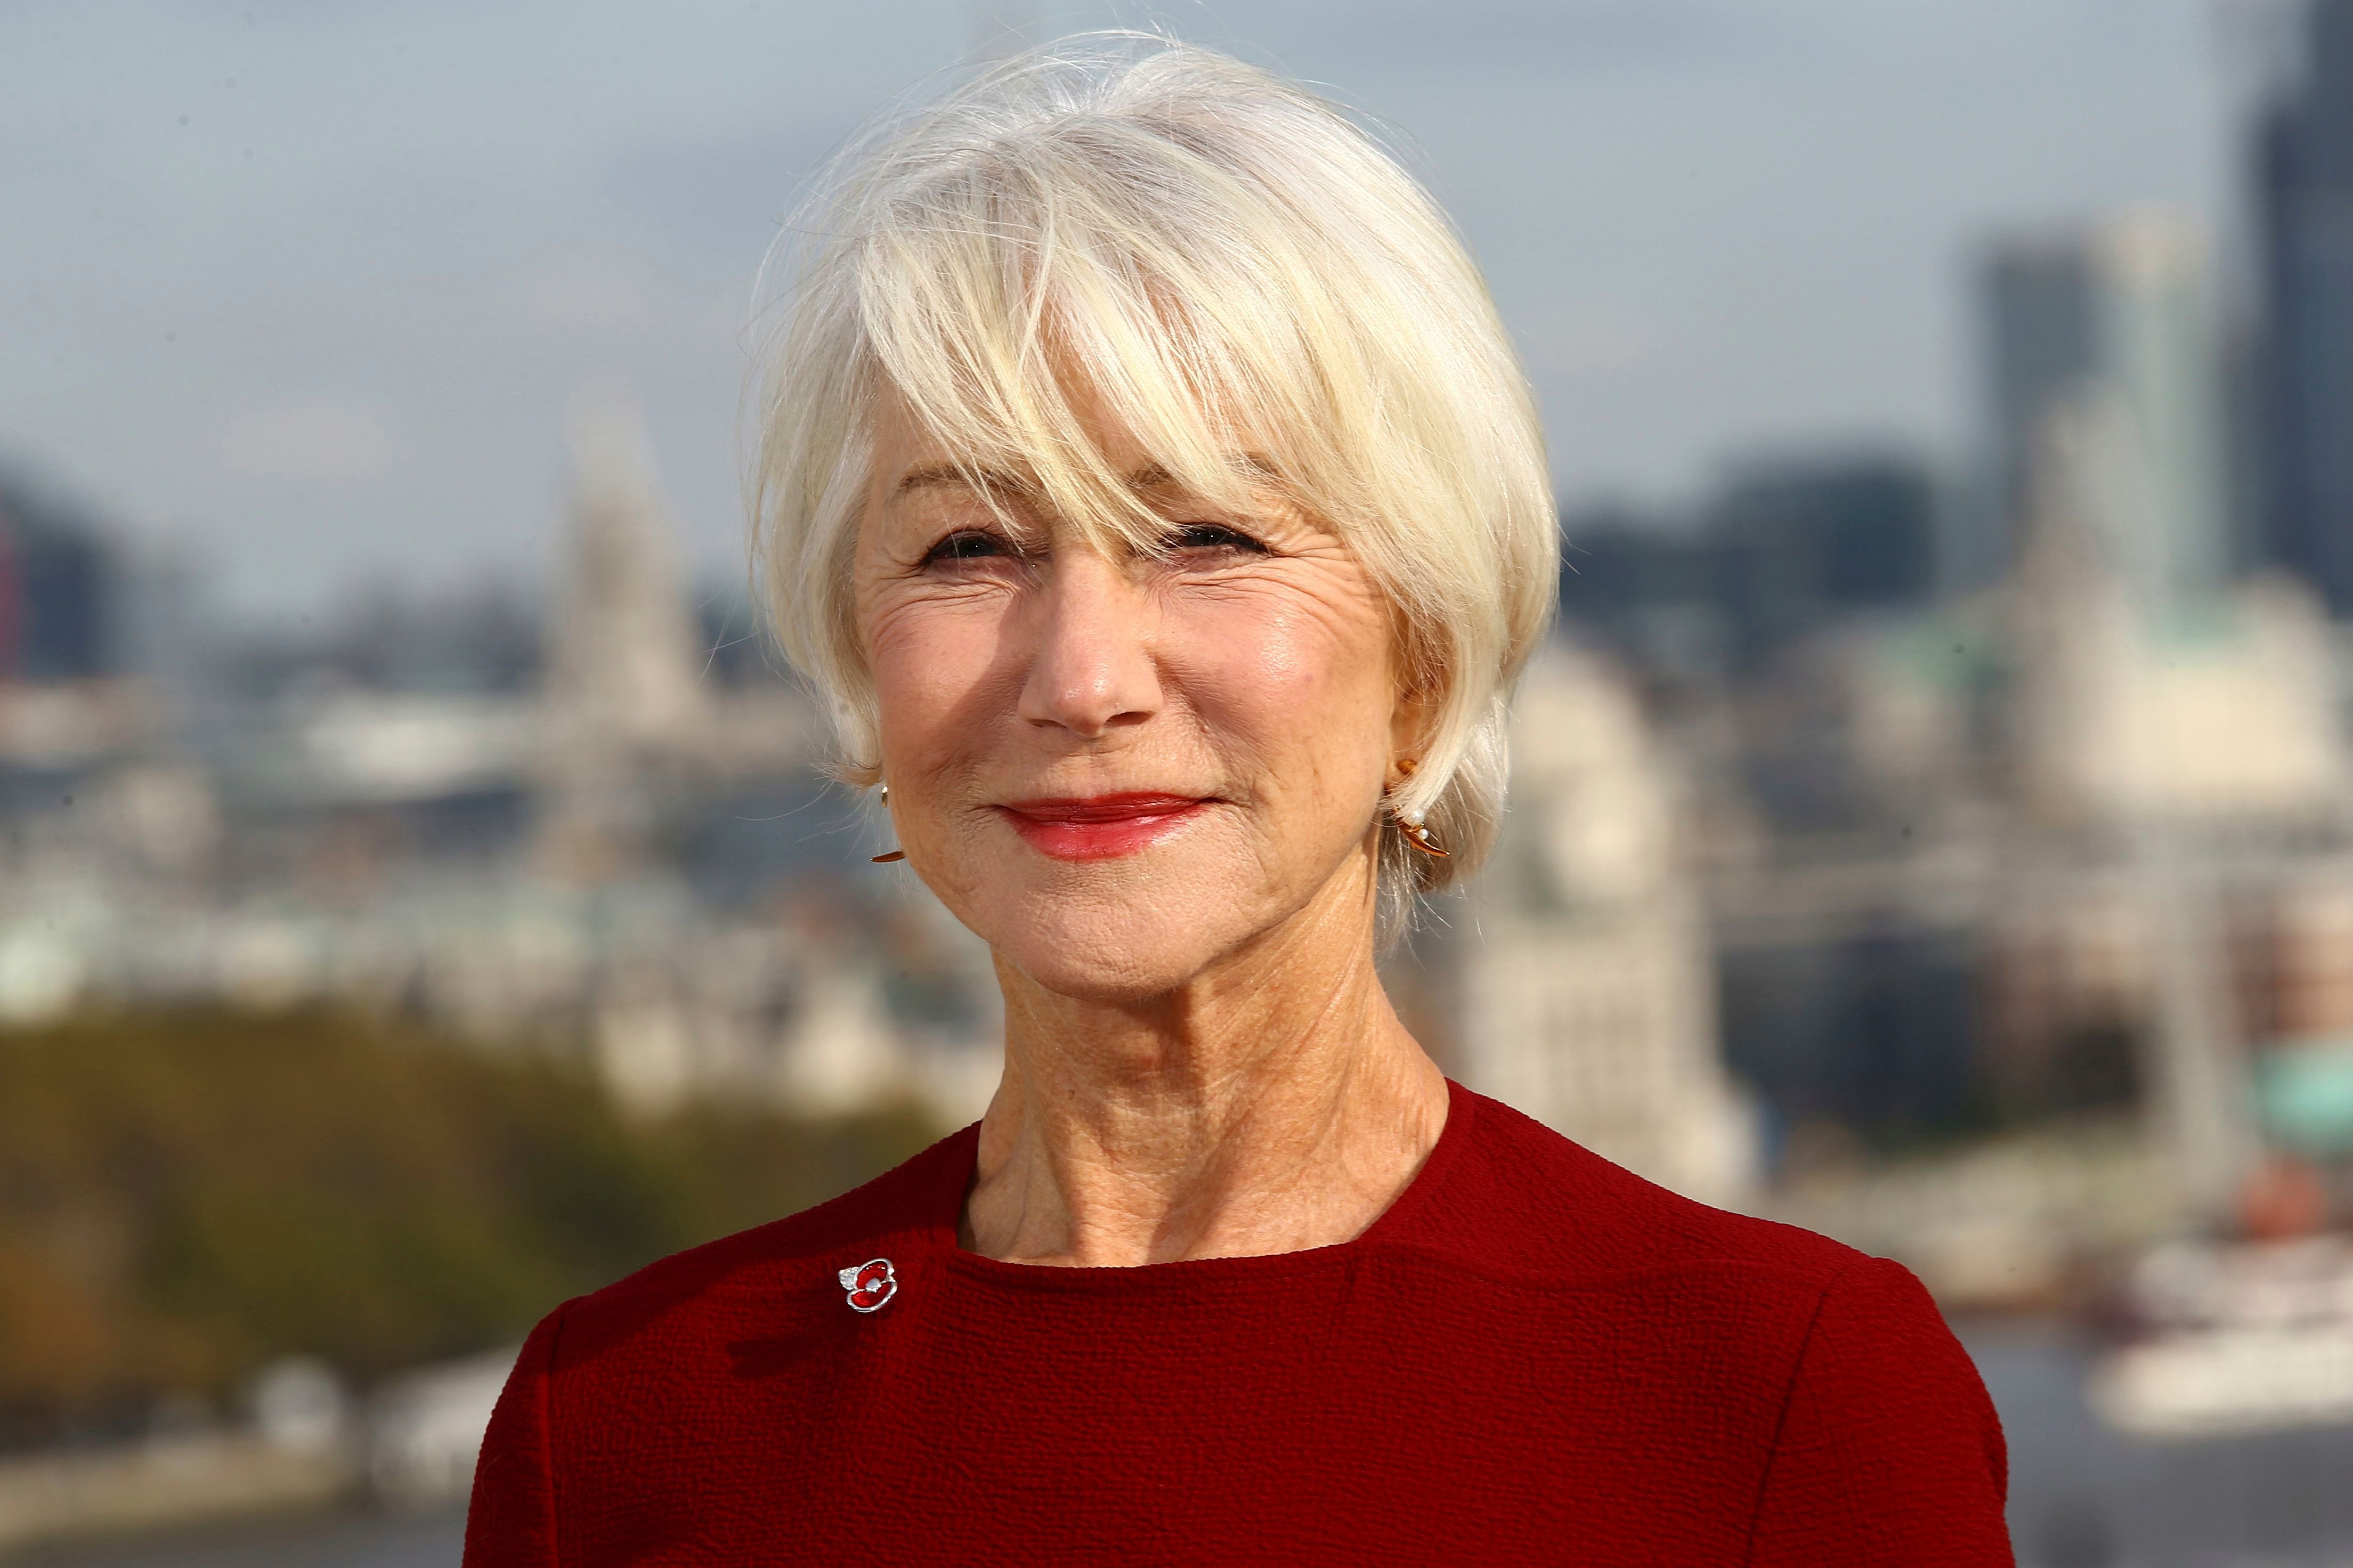 Helen Mirren: 5 Facts You Didn't Know About 'The Queen' Actress